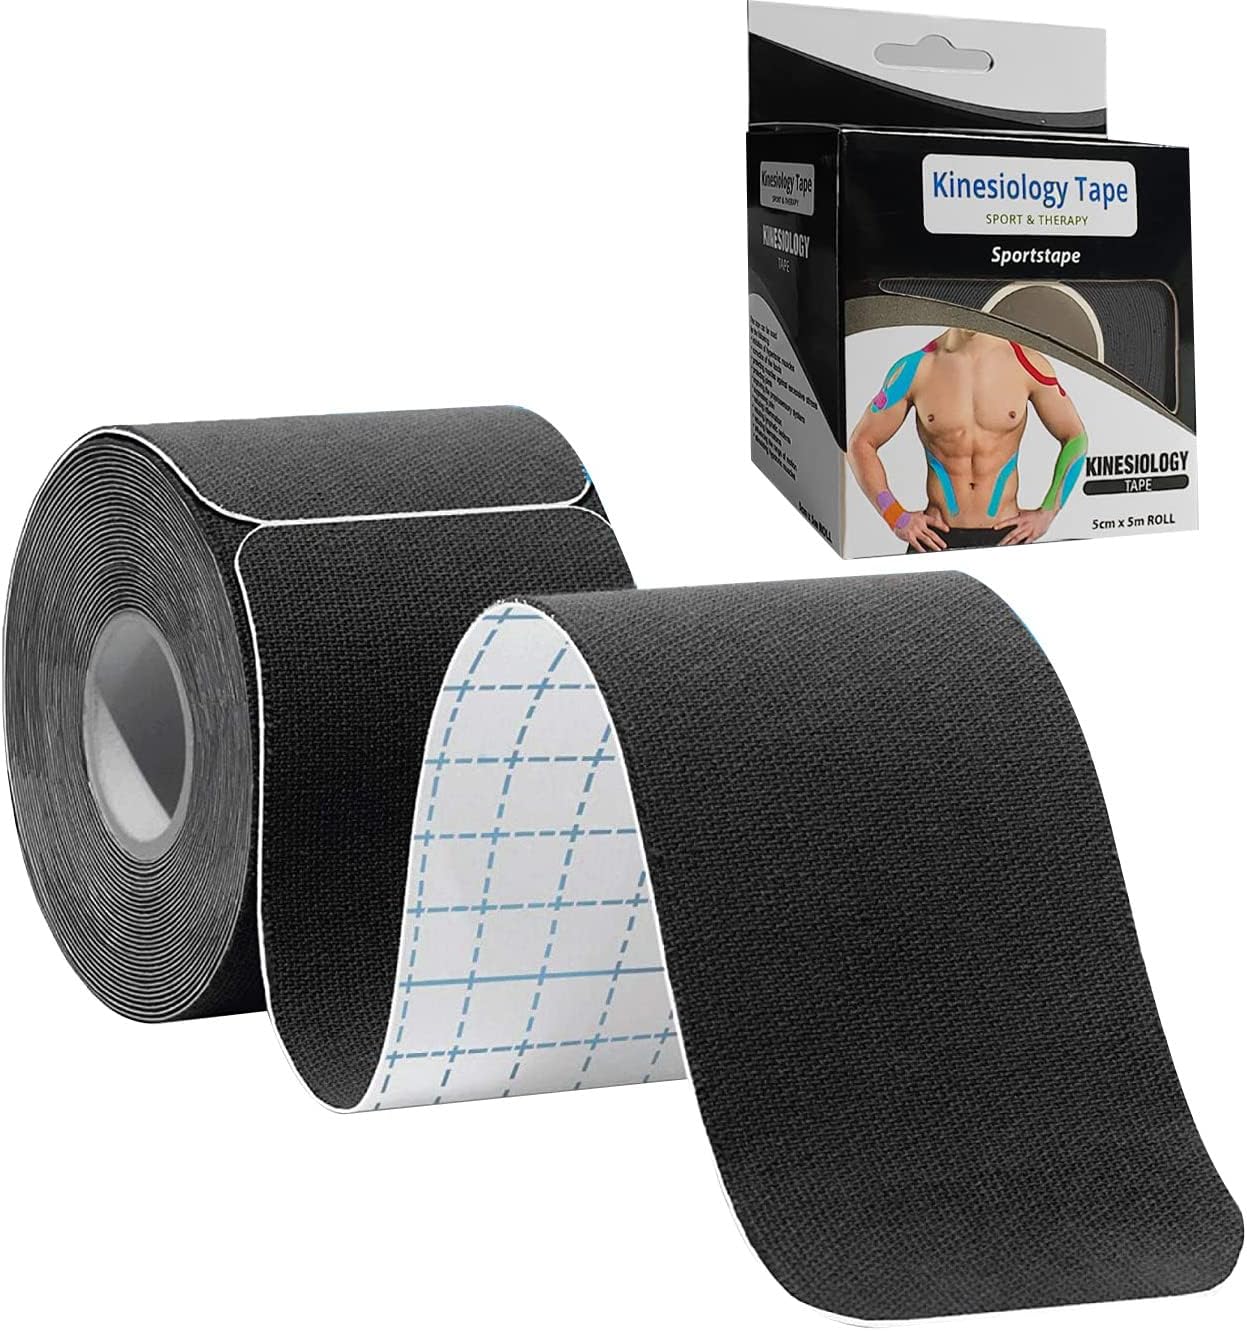 Kinesiology Tape Pro Precut 20 Strips Athletic Sports [...]